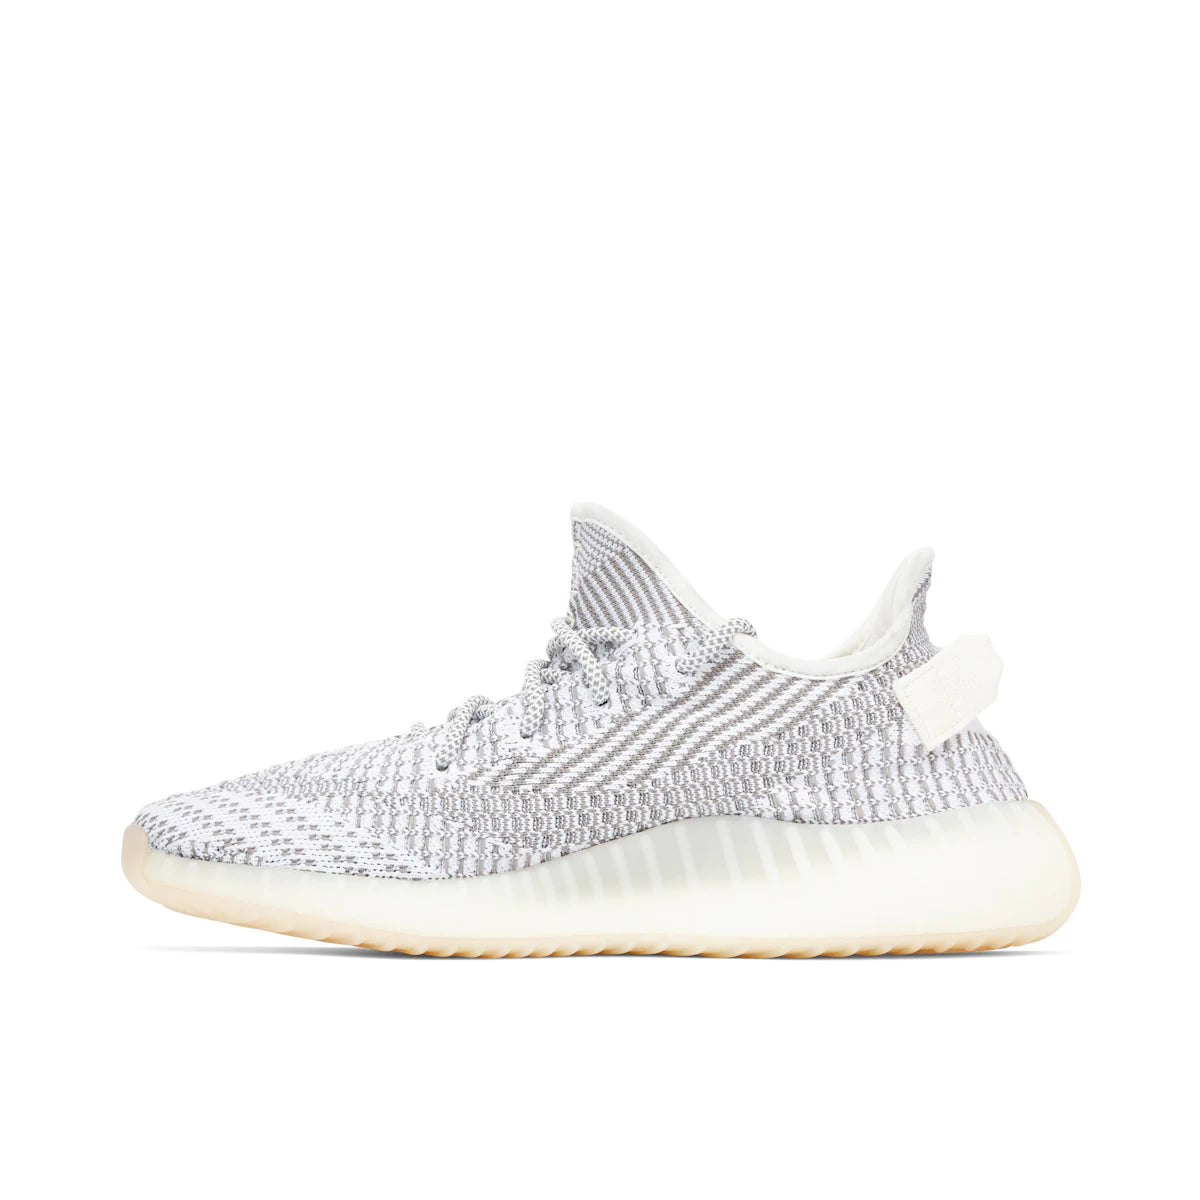 Adidas Yeezy Boost 350 V2 Static by Yeezy from £255.00